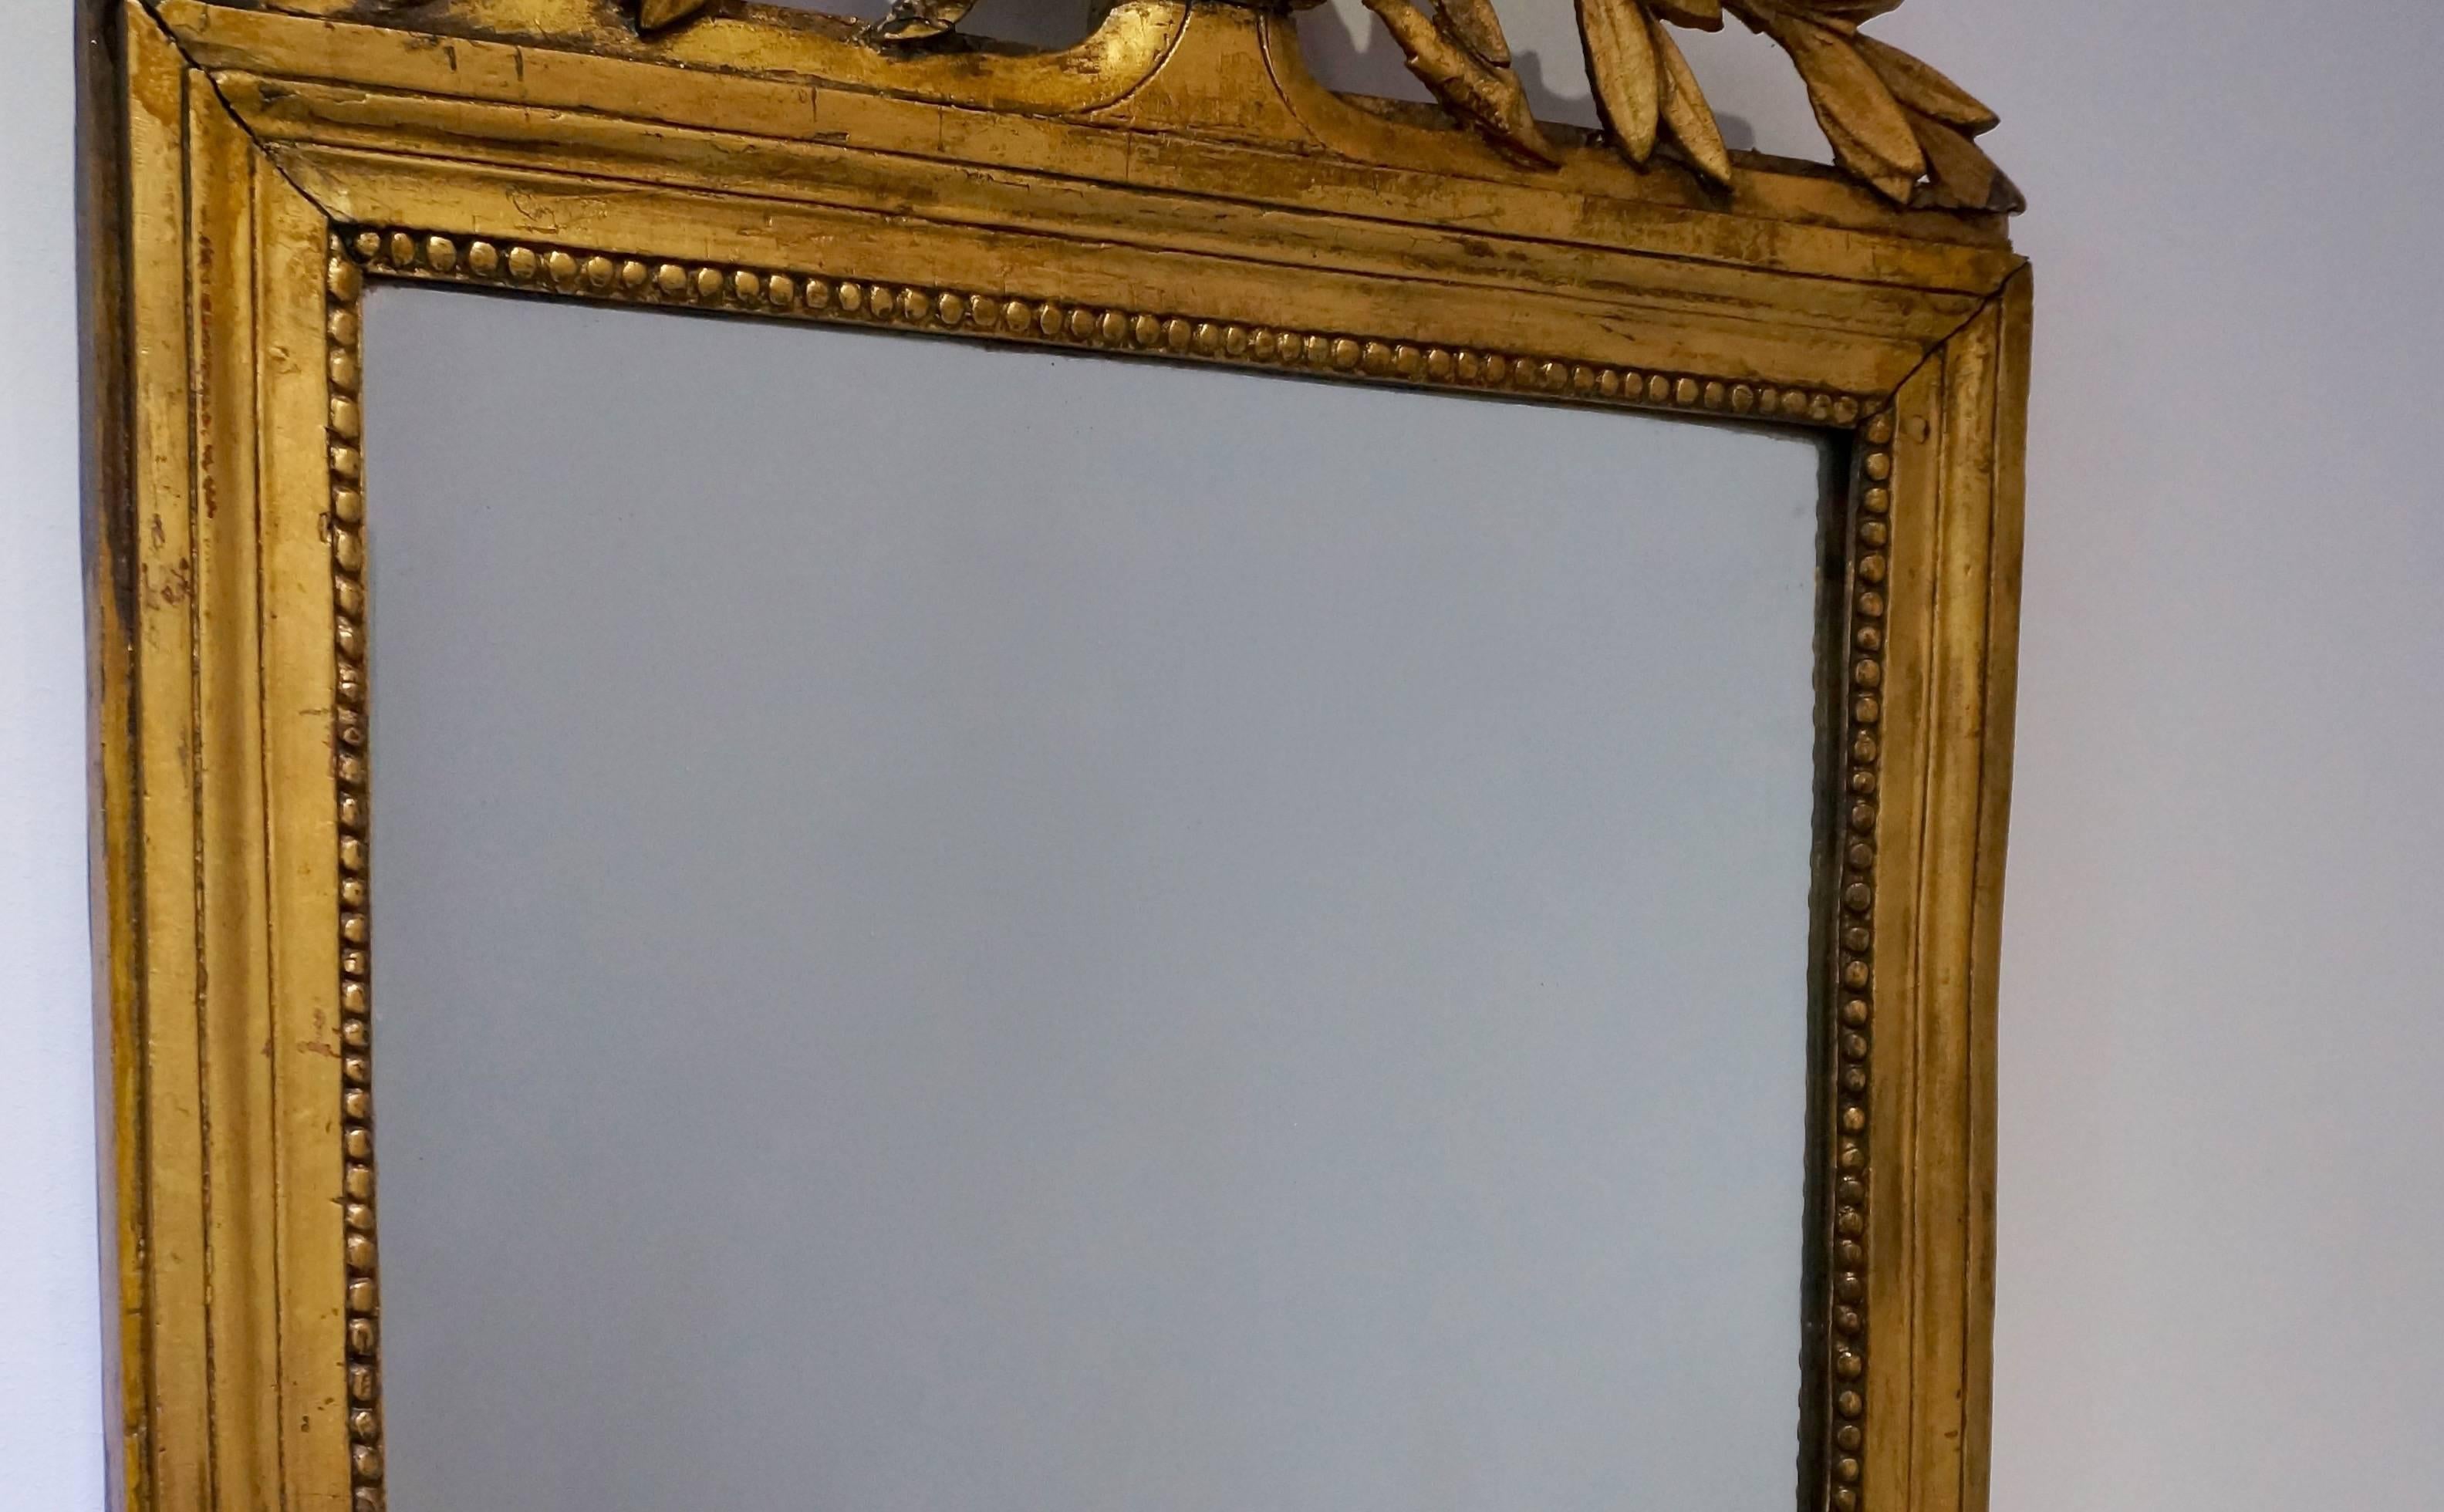 This mirror was created in France in the early part of the 19th century circa 1820, during the French-Regency period. With its Classic lines very reminiscent of the Louis XVI period and crowned with two berry-laden fronds, sheet music and a